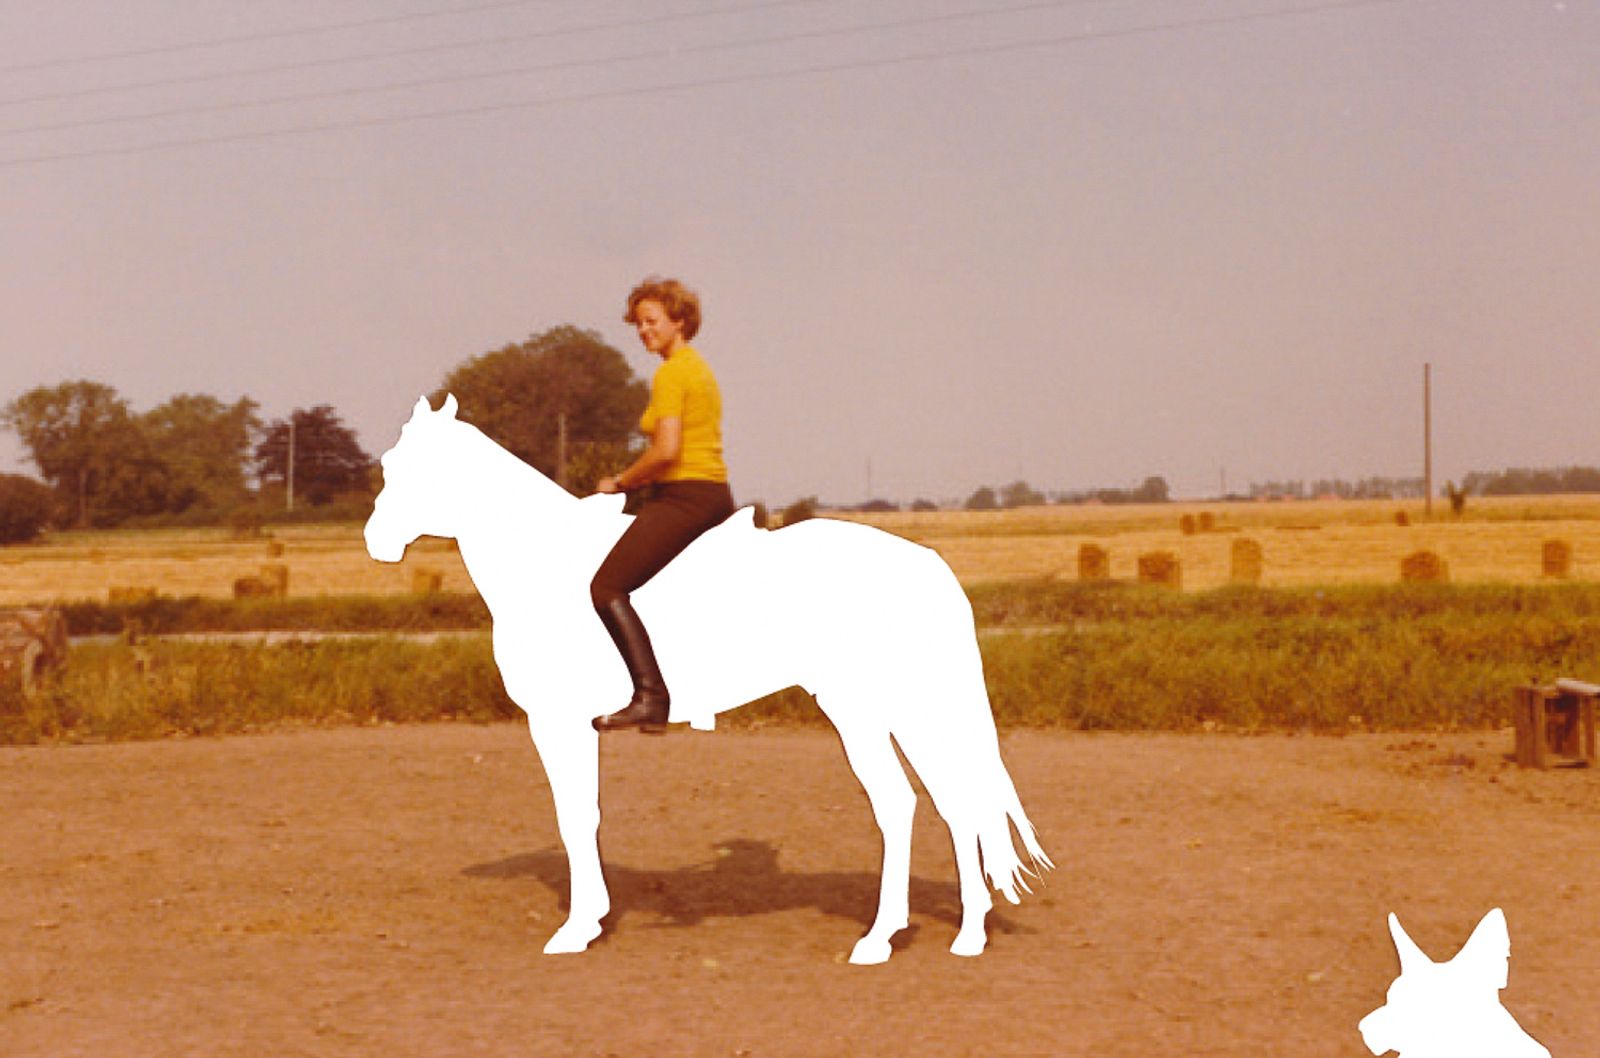 © Julia Mejnertsen - My mother riding a horse - family archival photograph